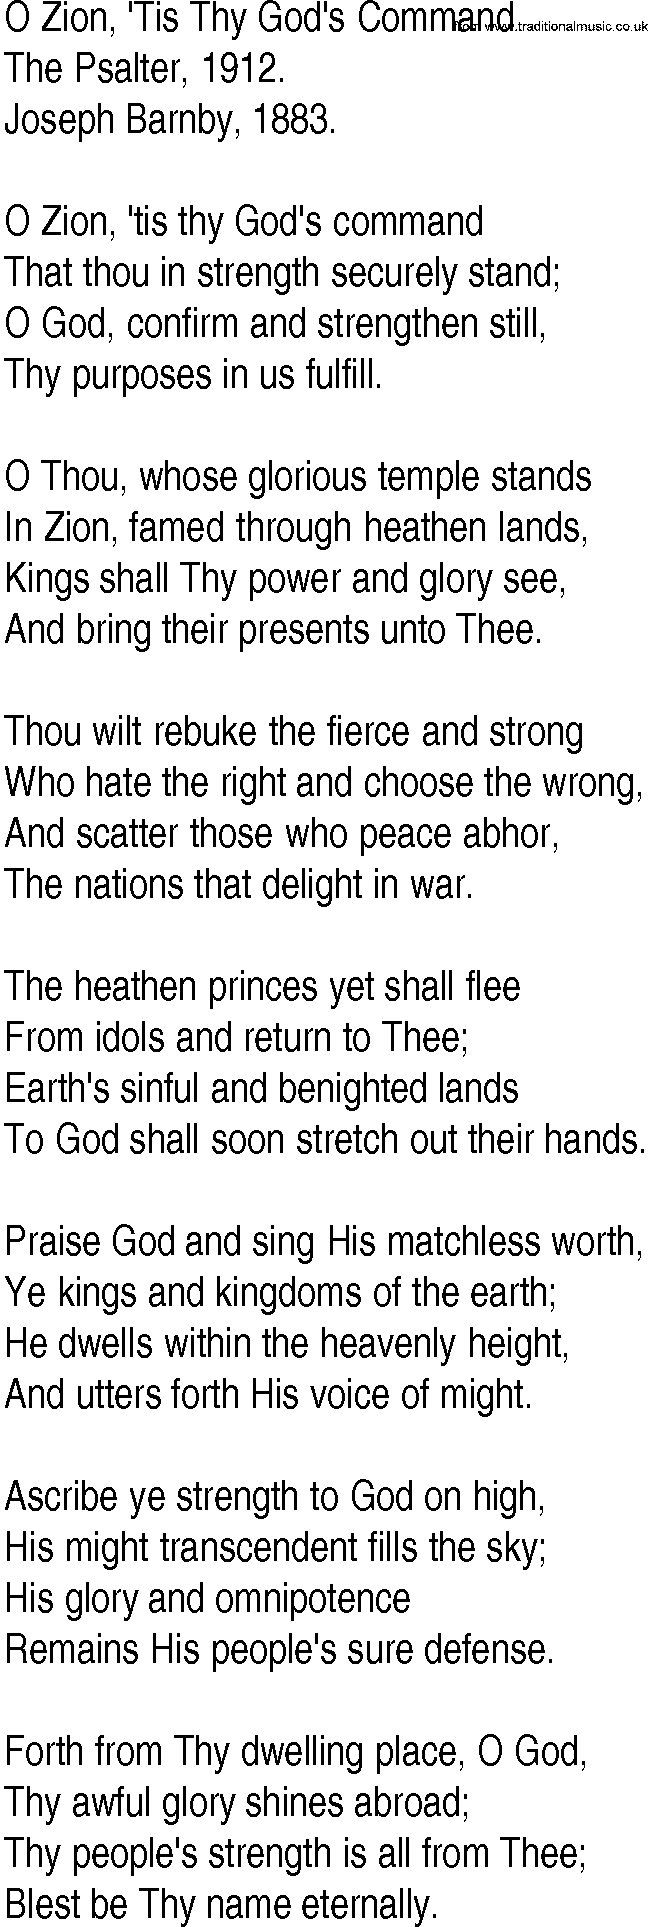 Hymn and Gospel Song: O Zion, 'Tis Thy God's Command by The Psalter lyrics